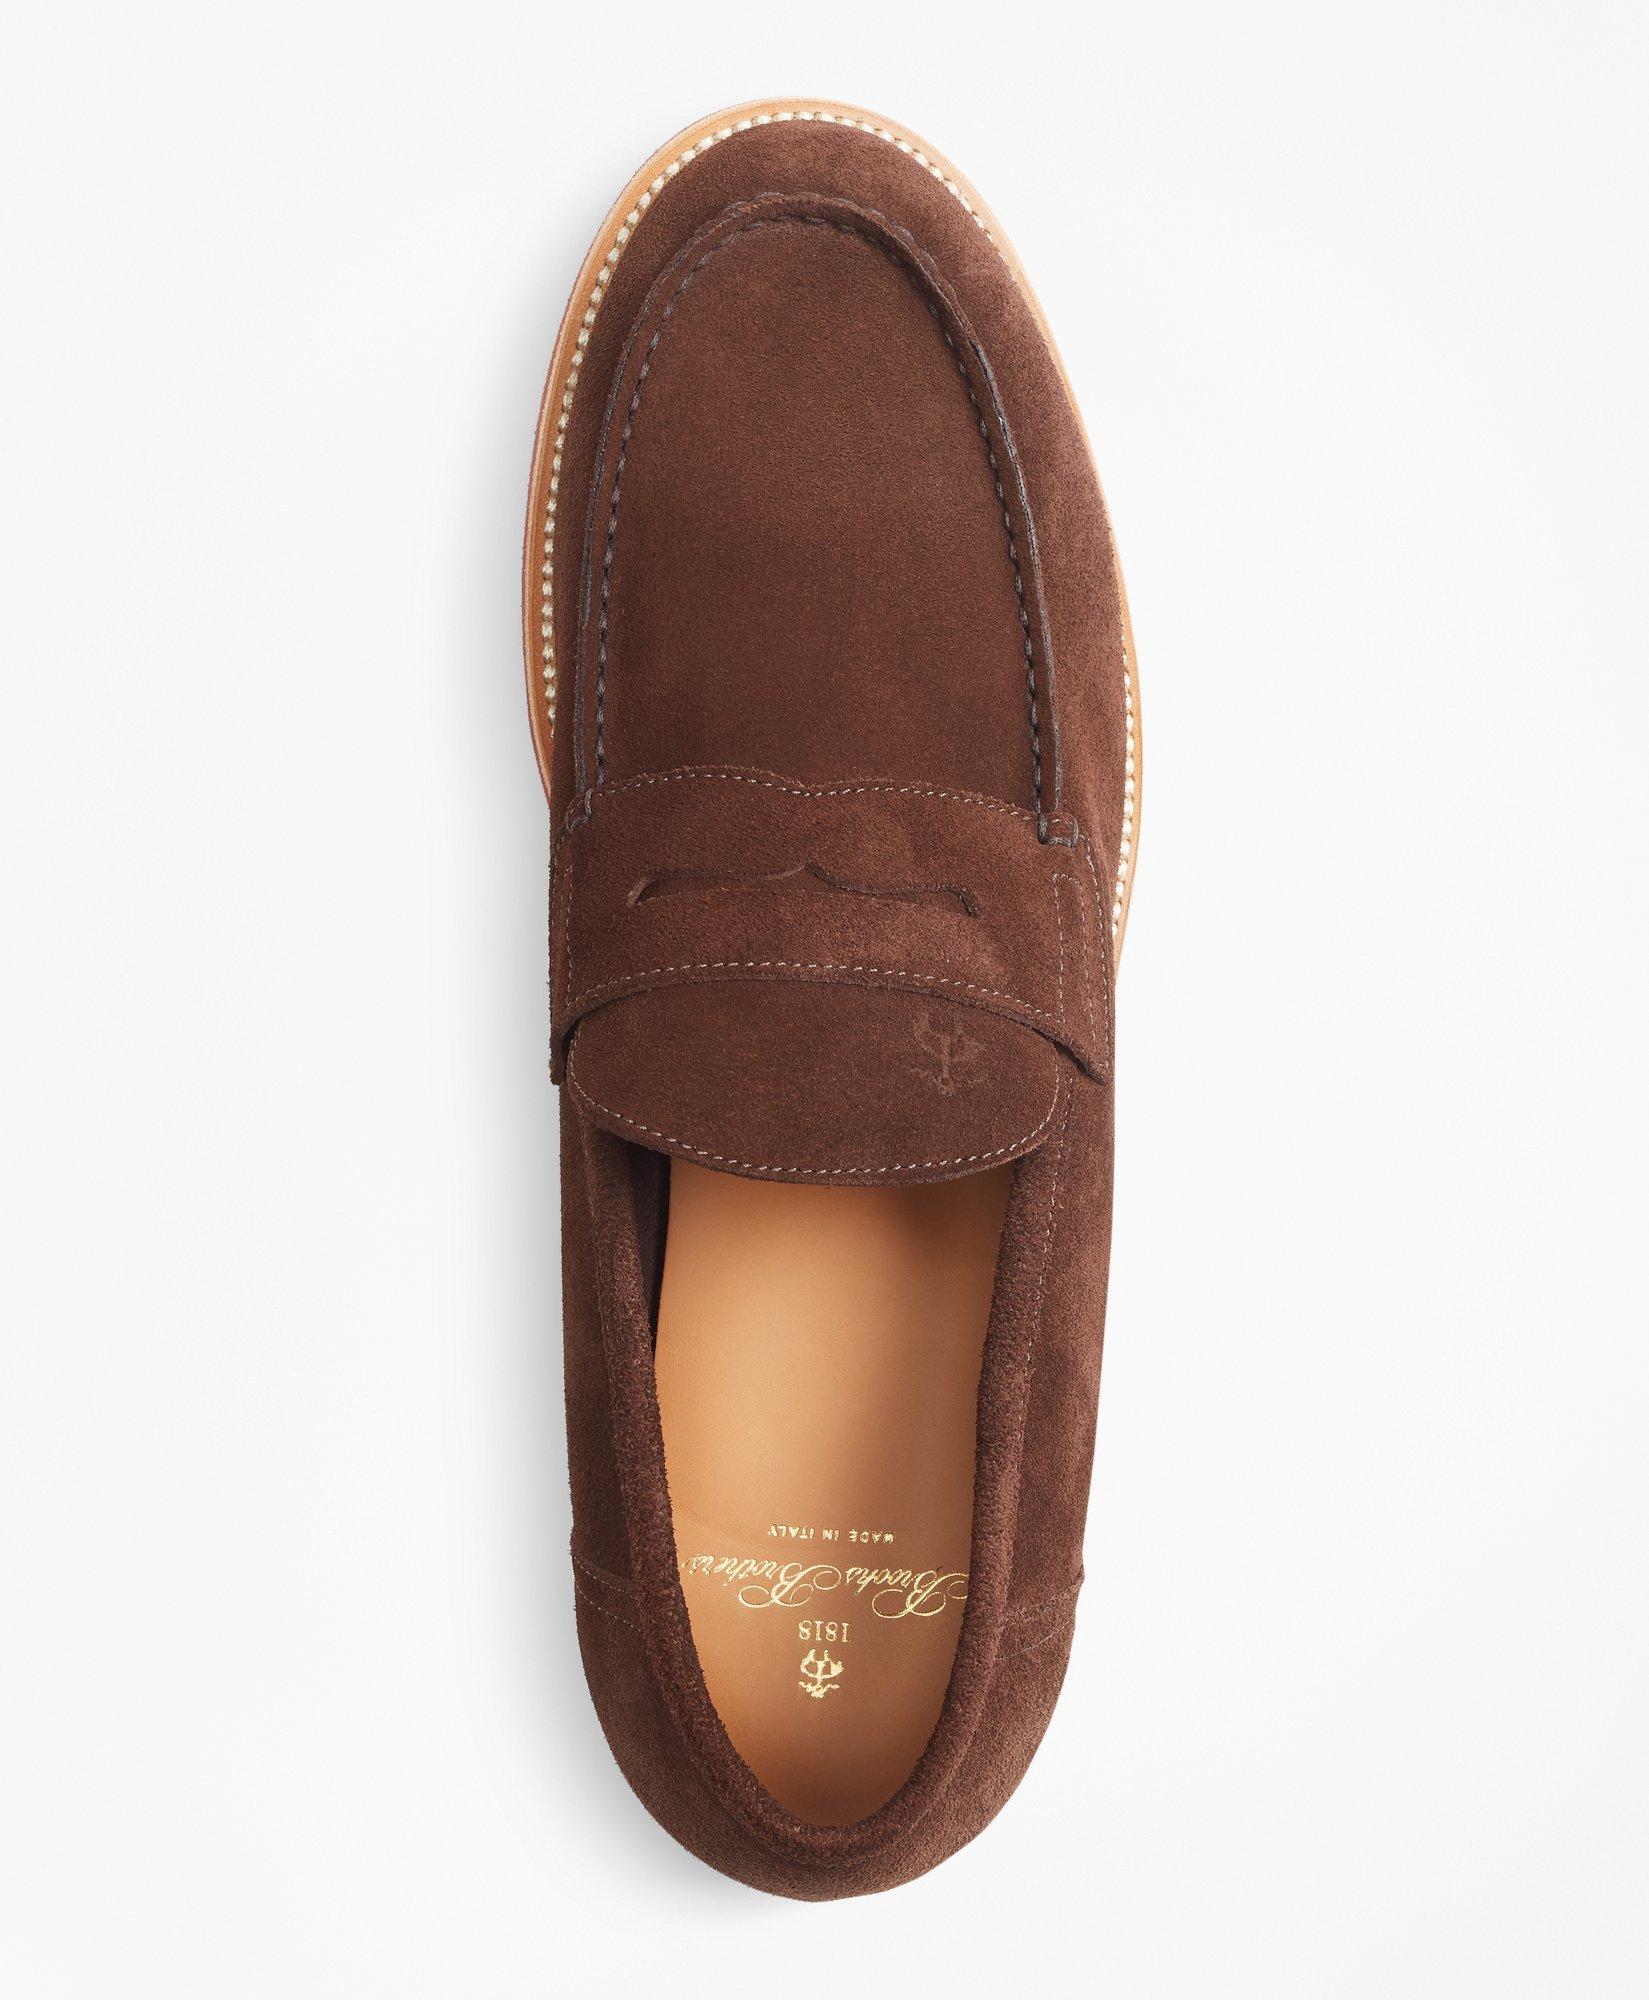 Penny Loafers Shoes For Men - Made In Italy